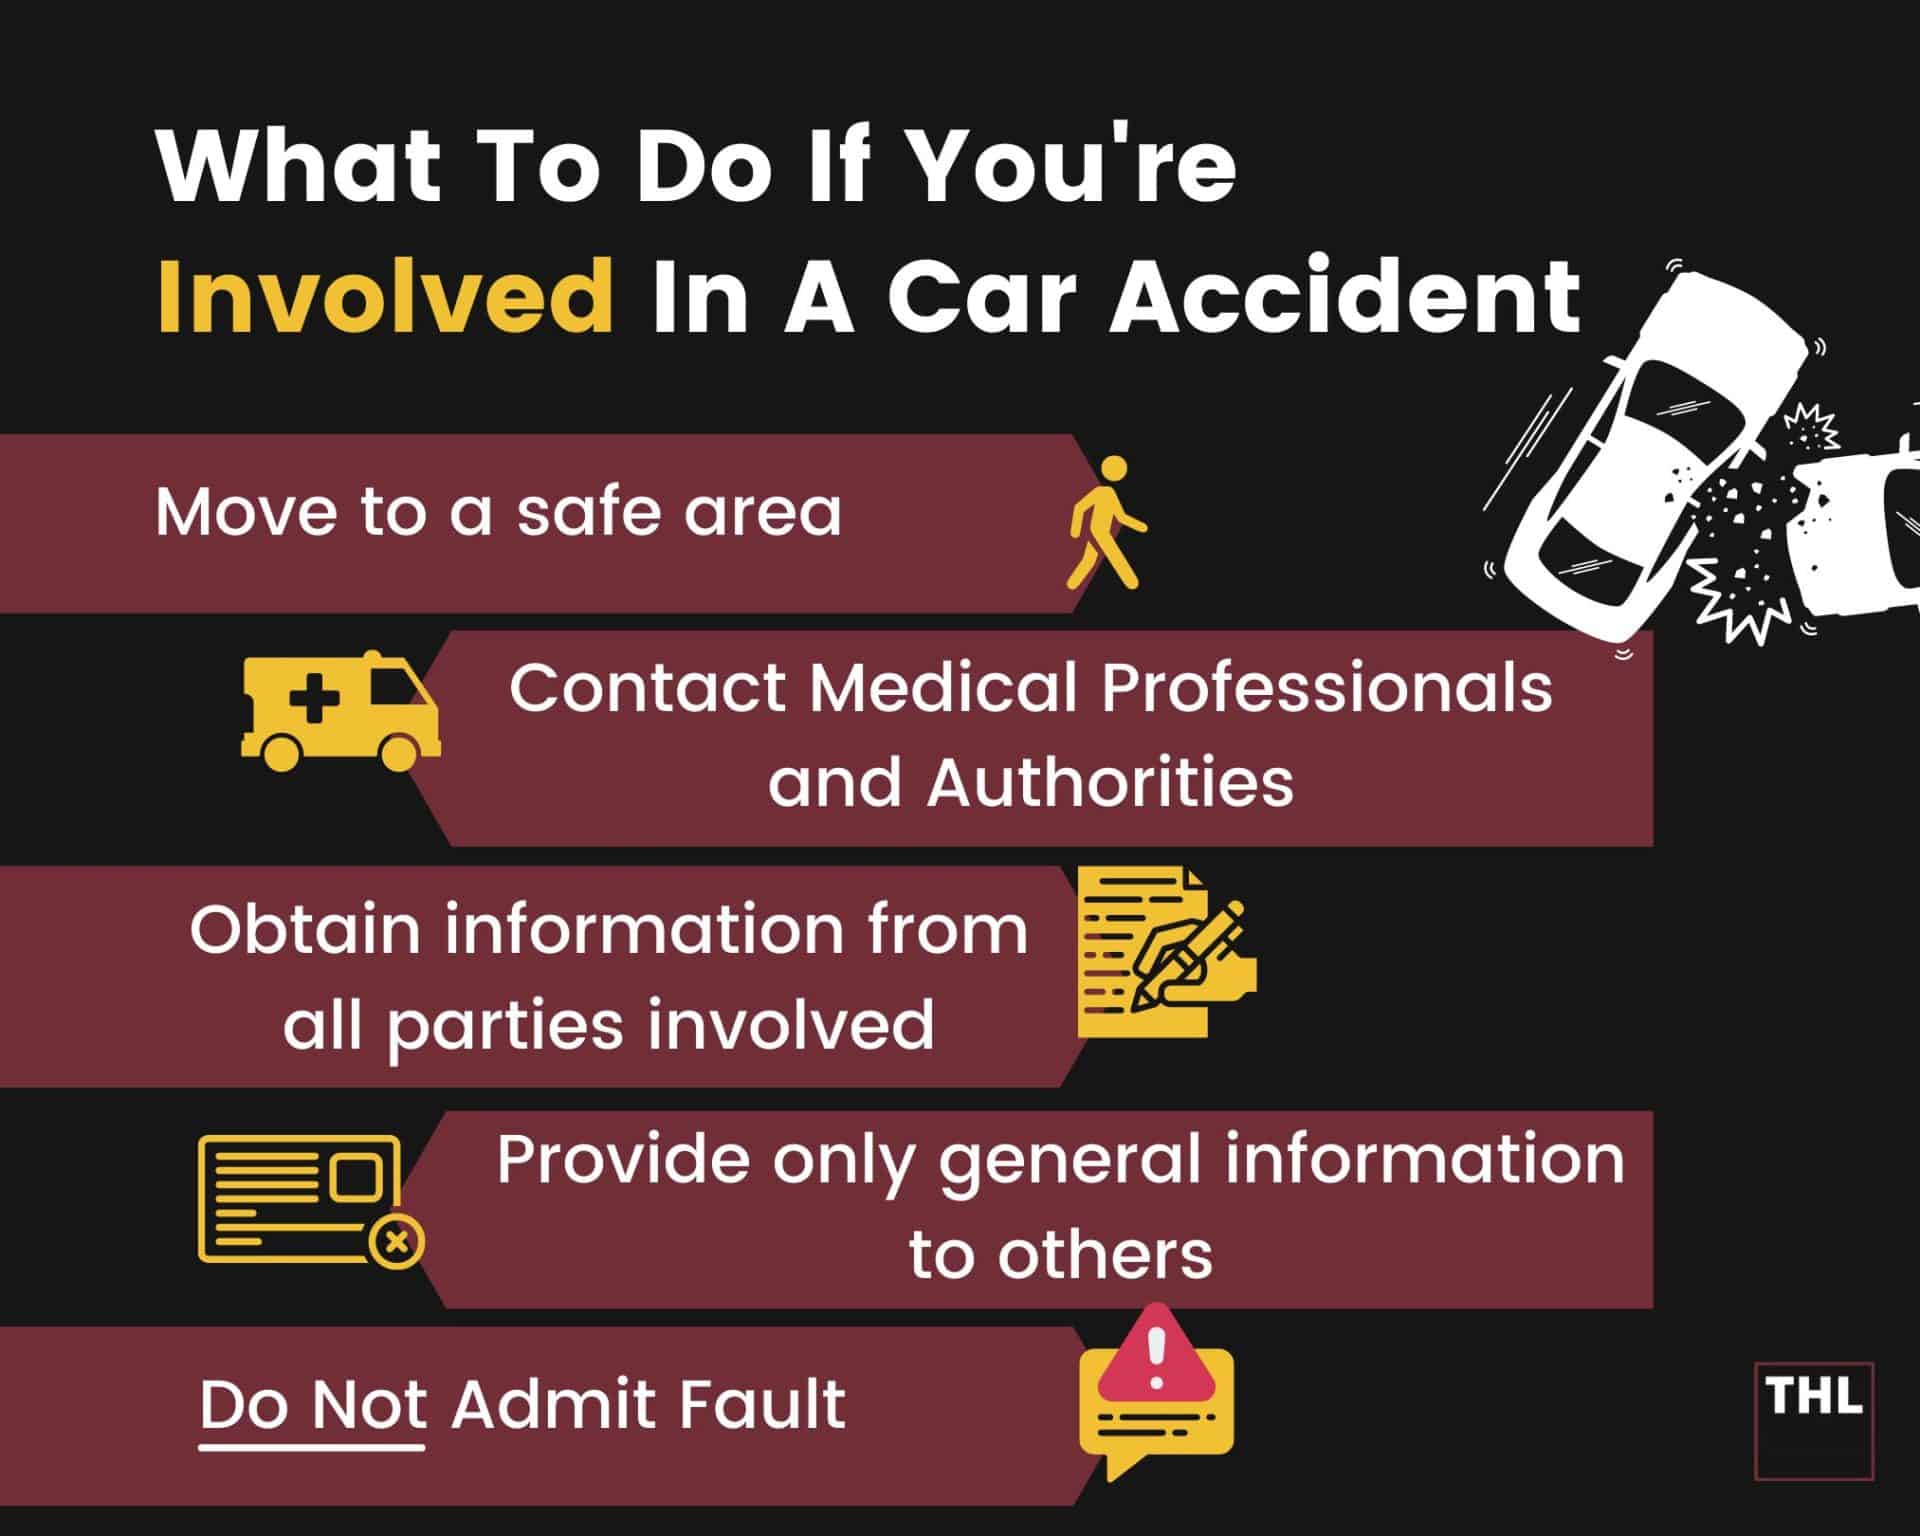 I Was In A Car Accident in Chicago (IL) - What Should I Do Now? | Motor Vehicle Accident in Chicago (IL)